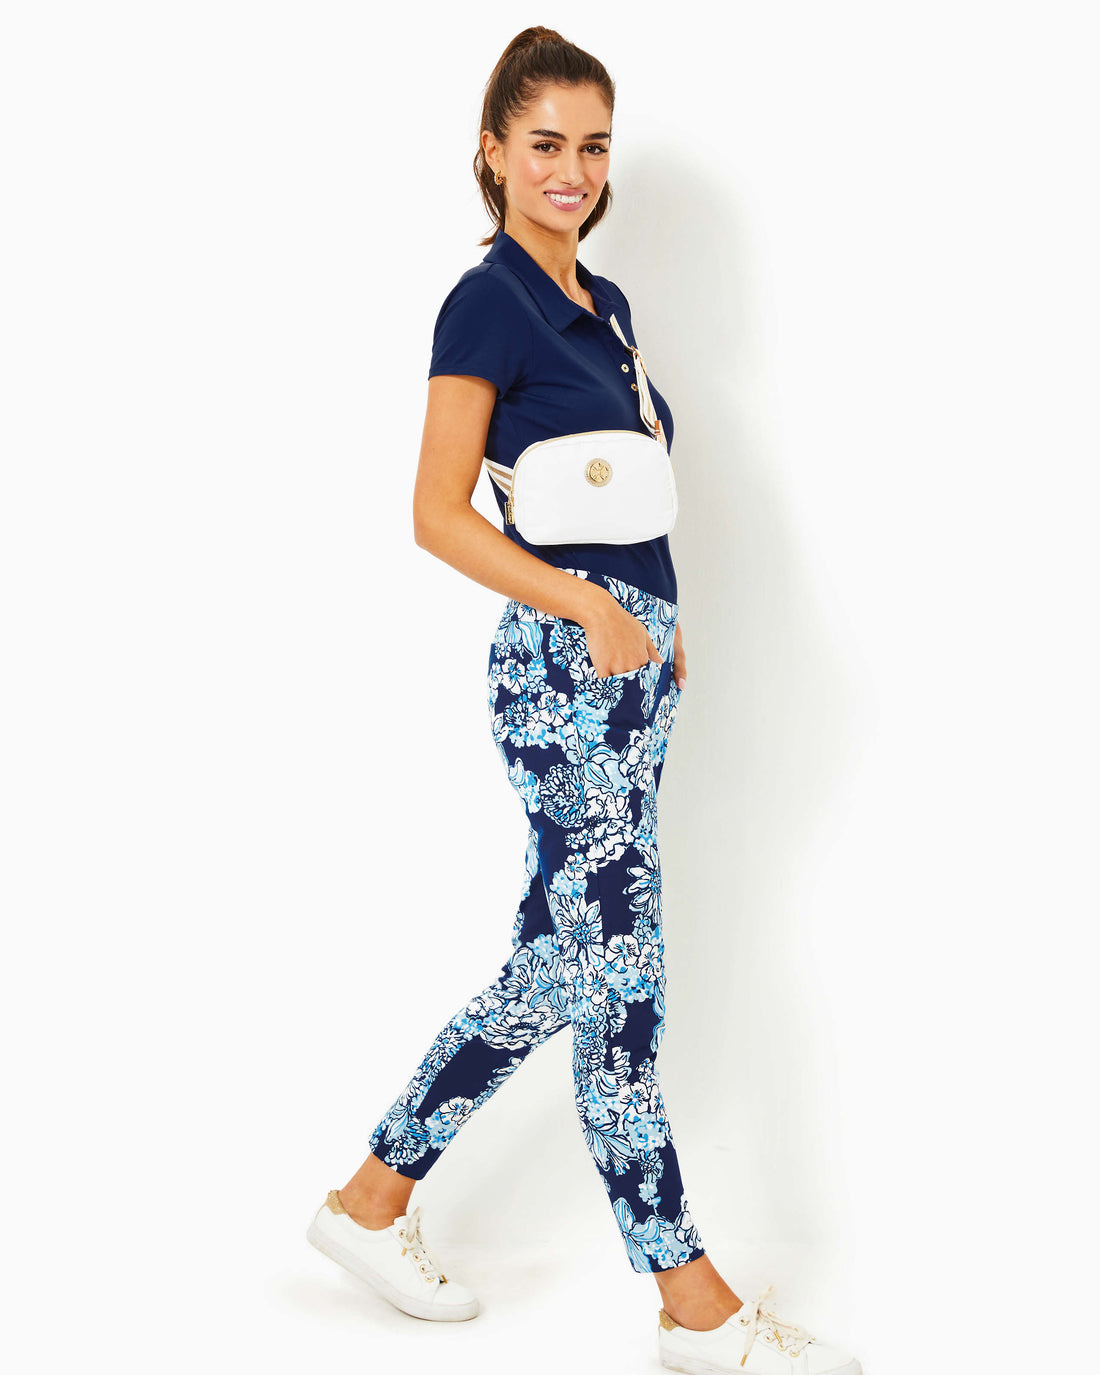 Lilly Pulitzer Activewear – Cloister Collection